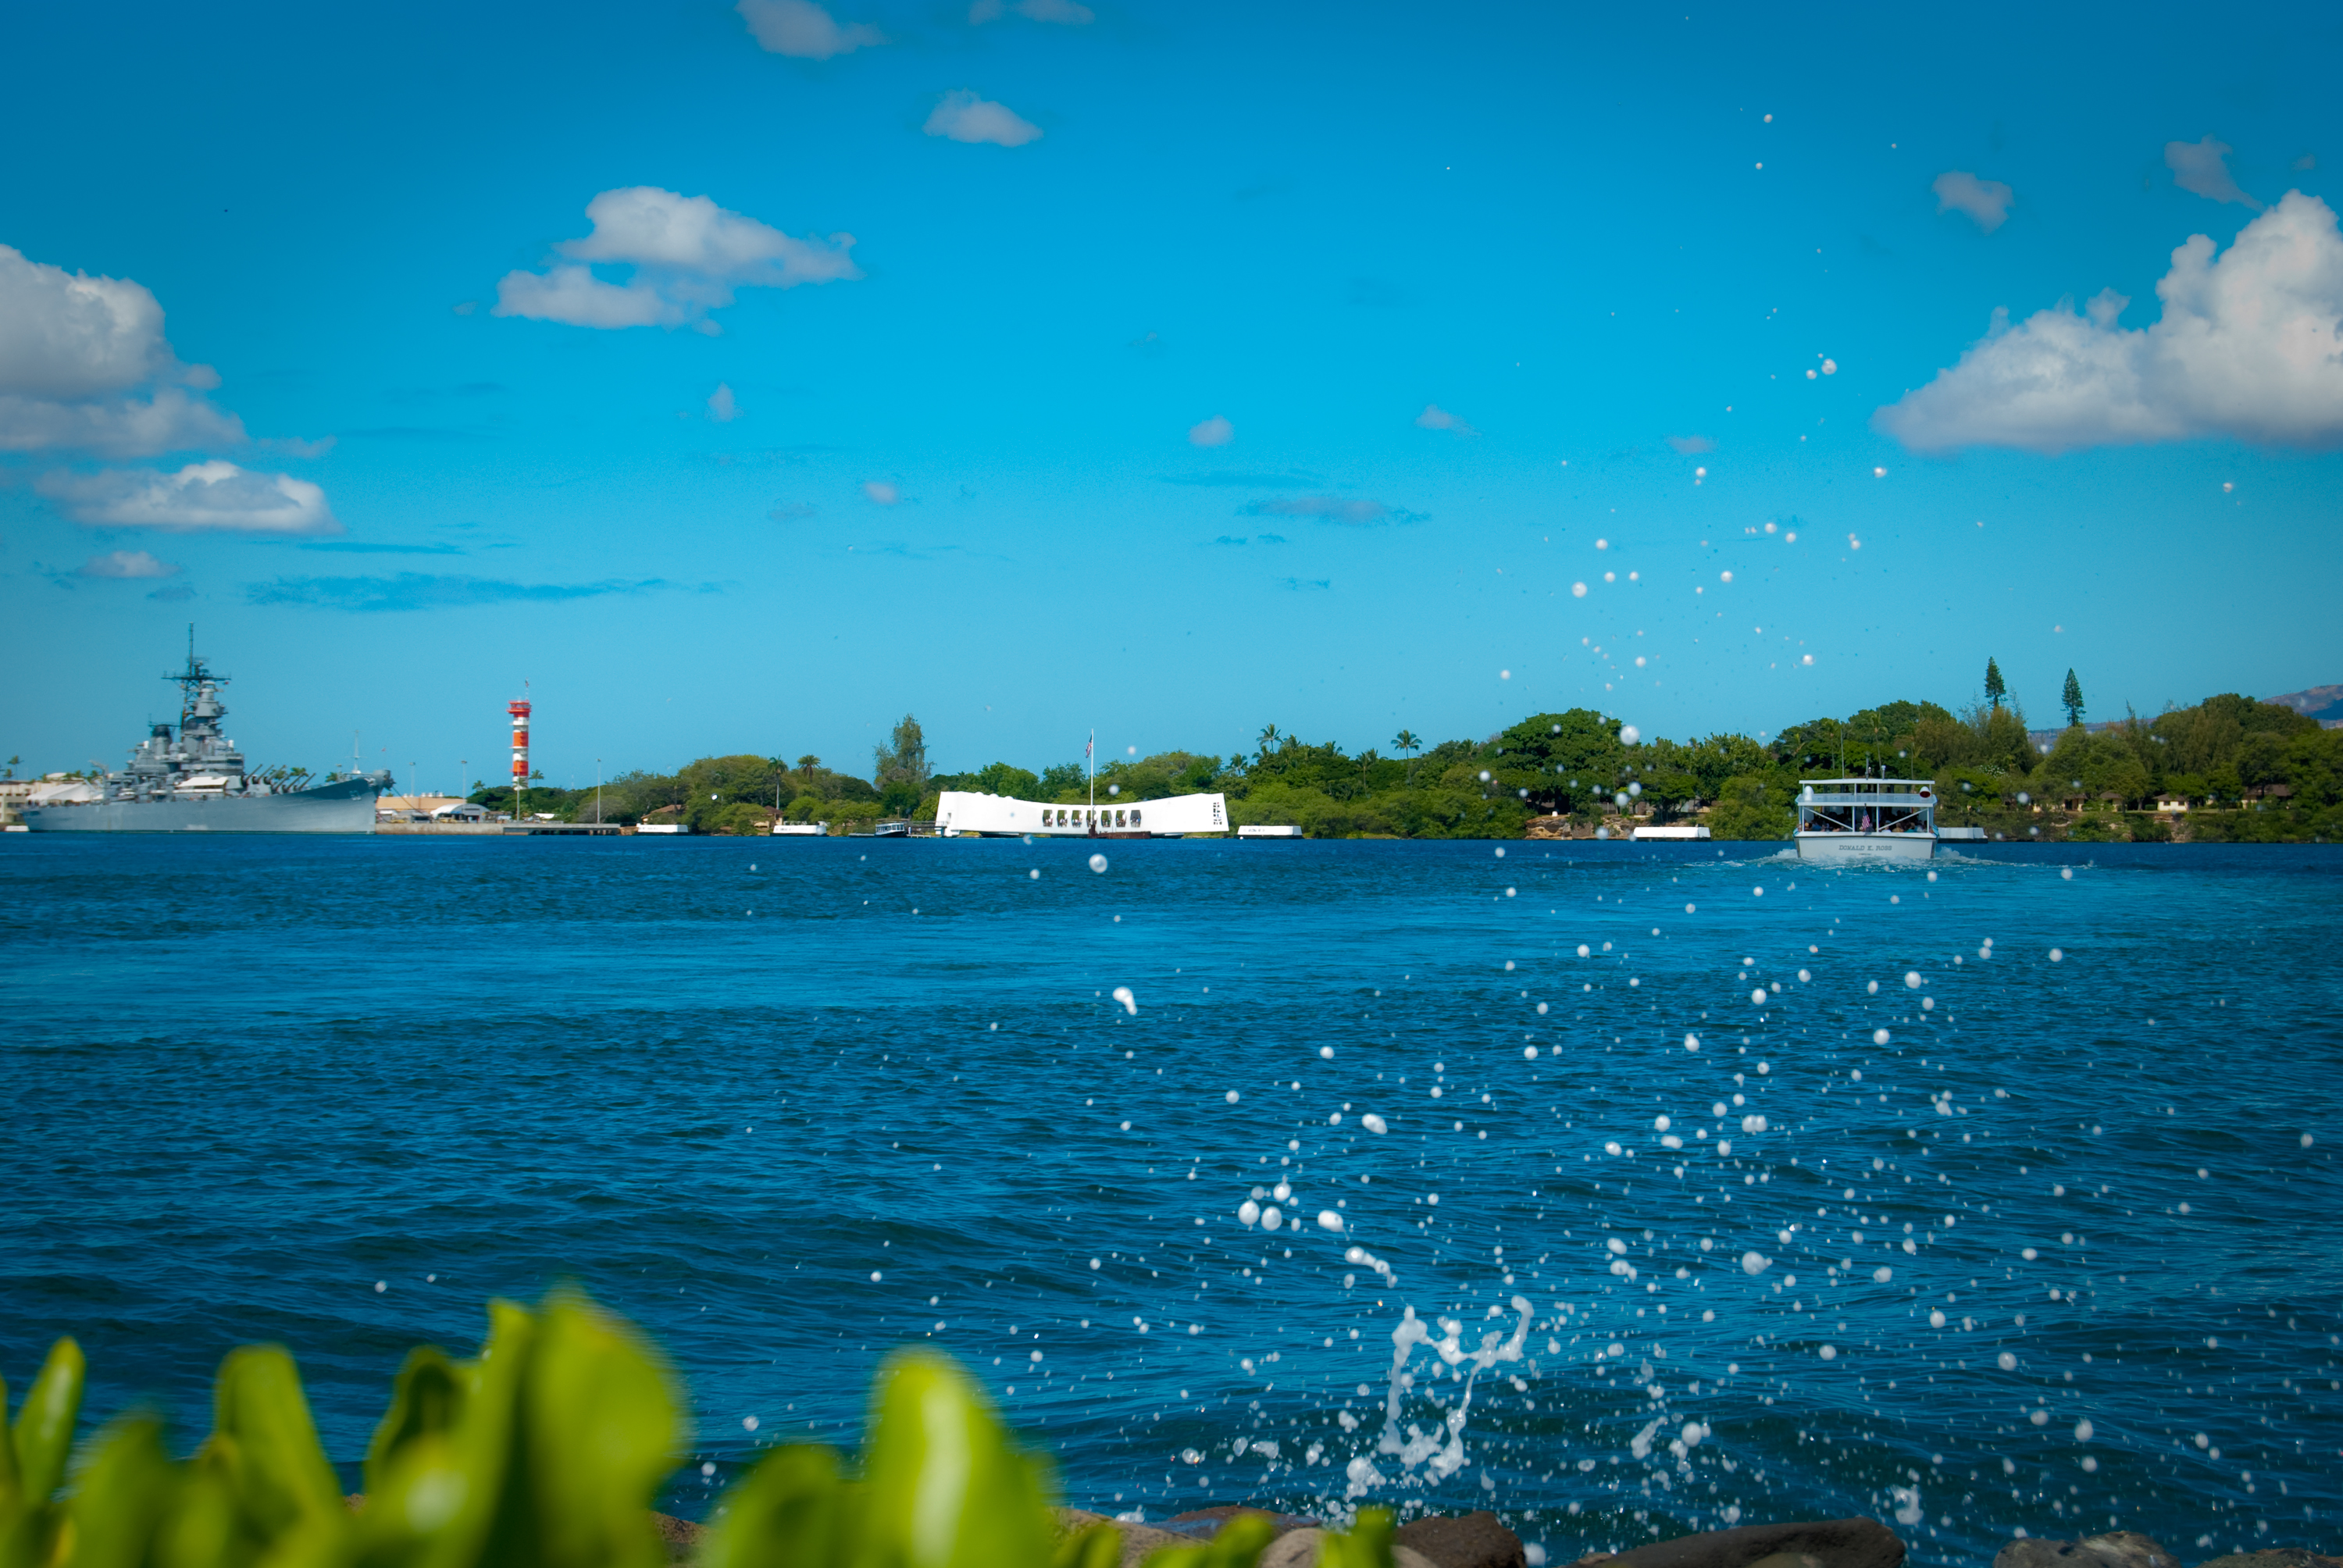 29-AUG-2013: Love this image of the USS Arizona Memorial in Pearl Harbor, with the surf spraying off the seawall in the foreground.